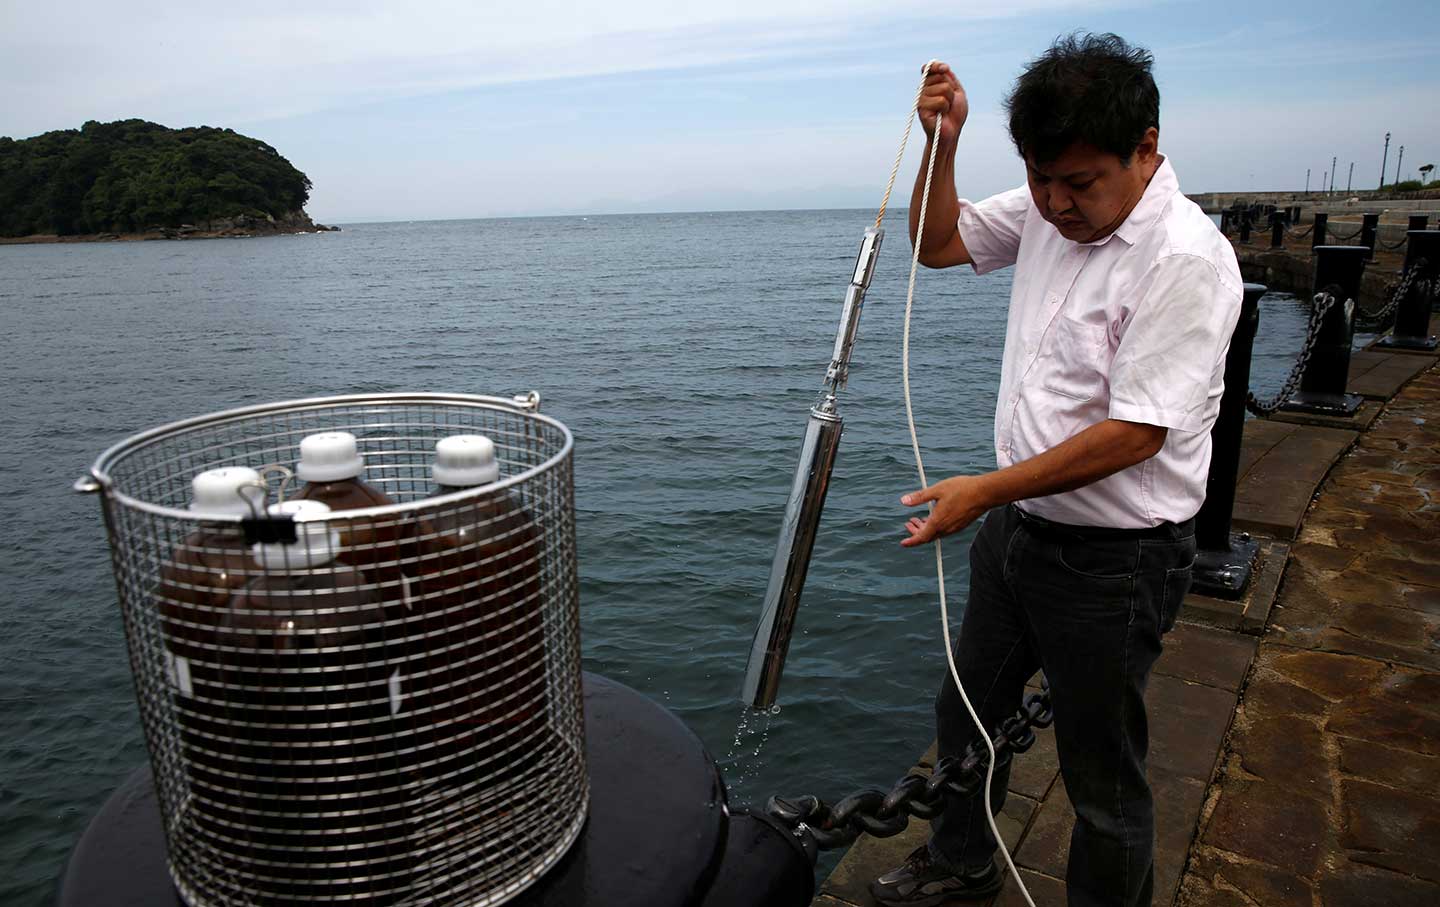 Mercury Poisoning Is Becoming a Global Public-Health Crisis